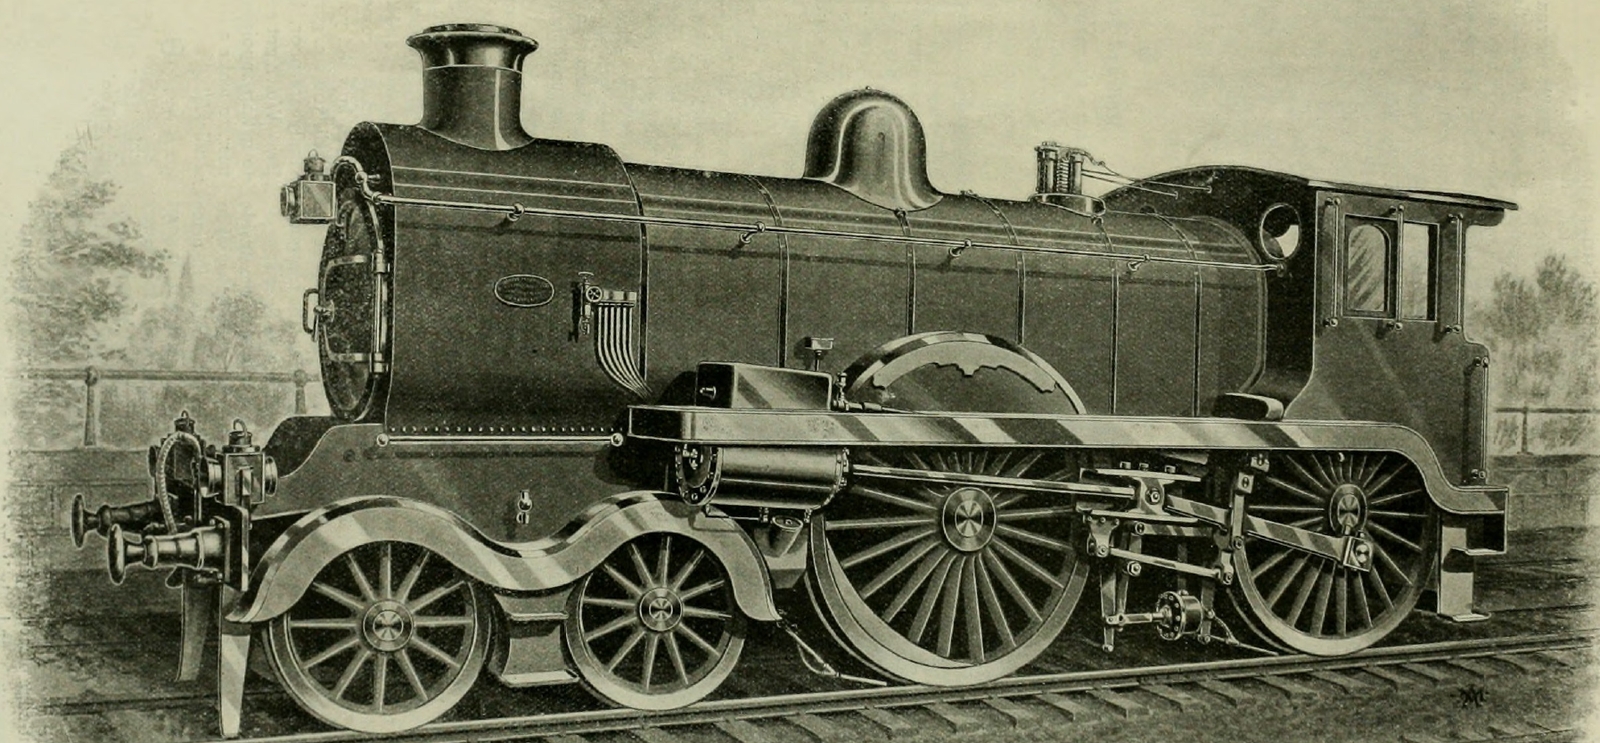 The locomotive before changed to American standards